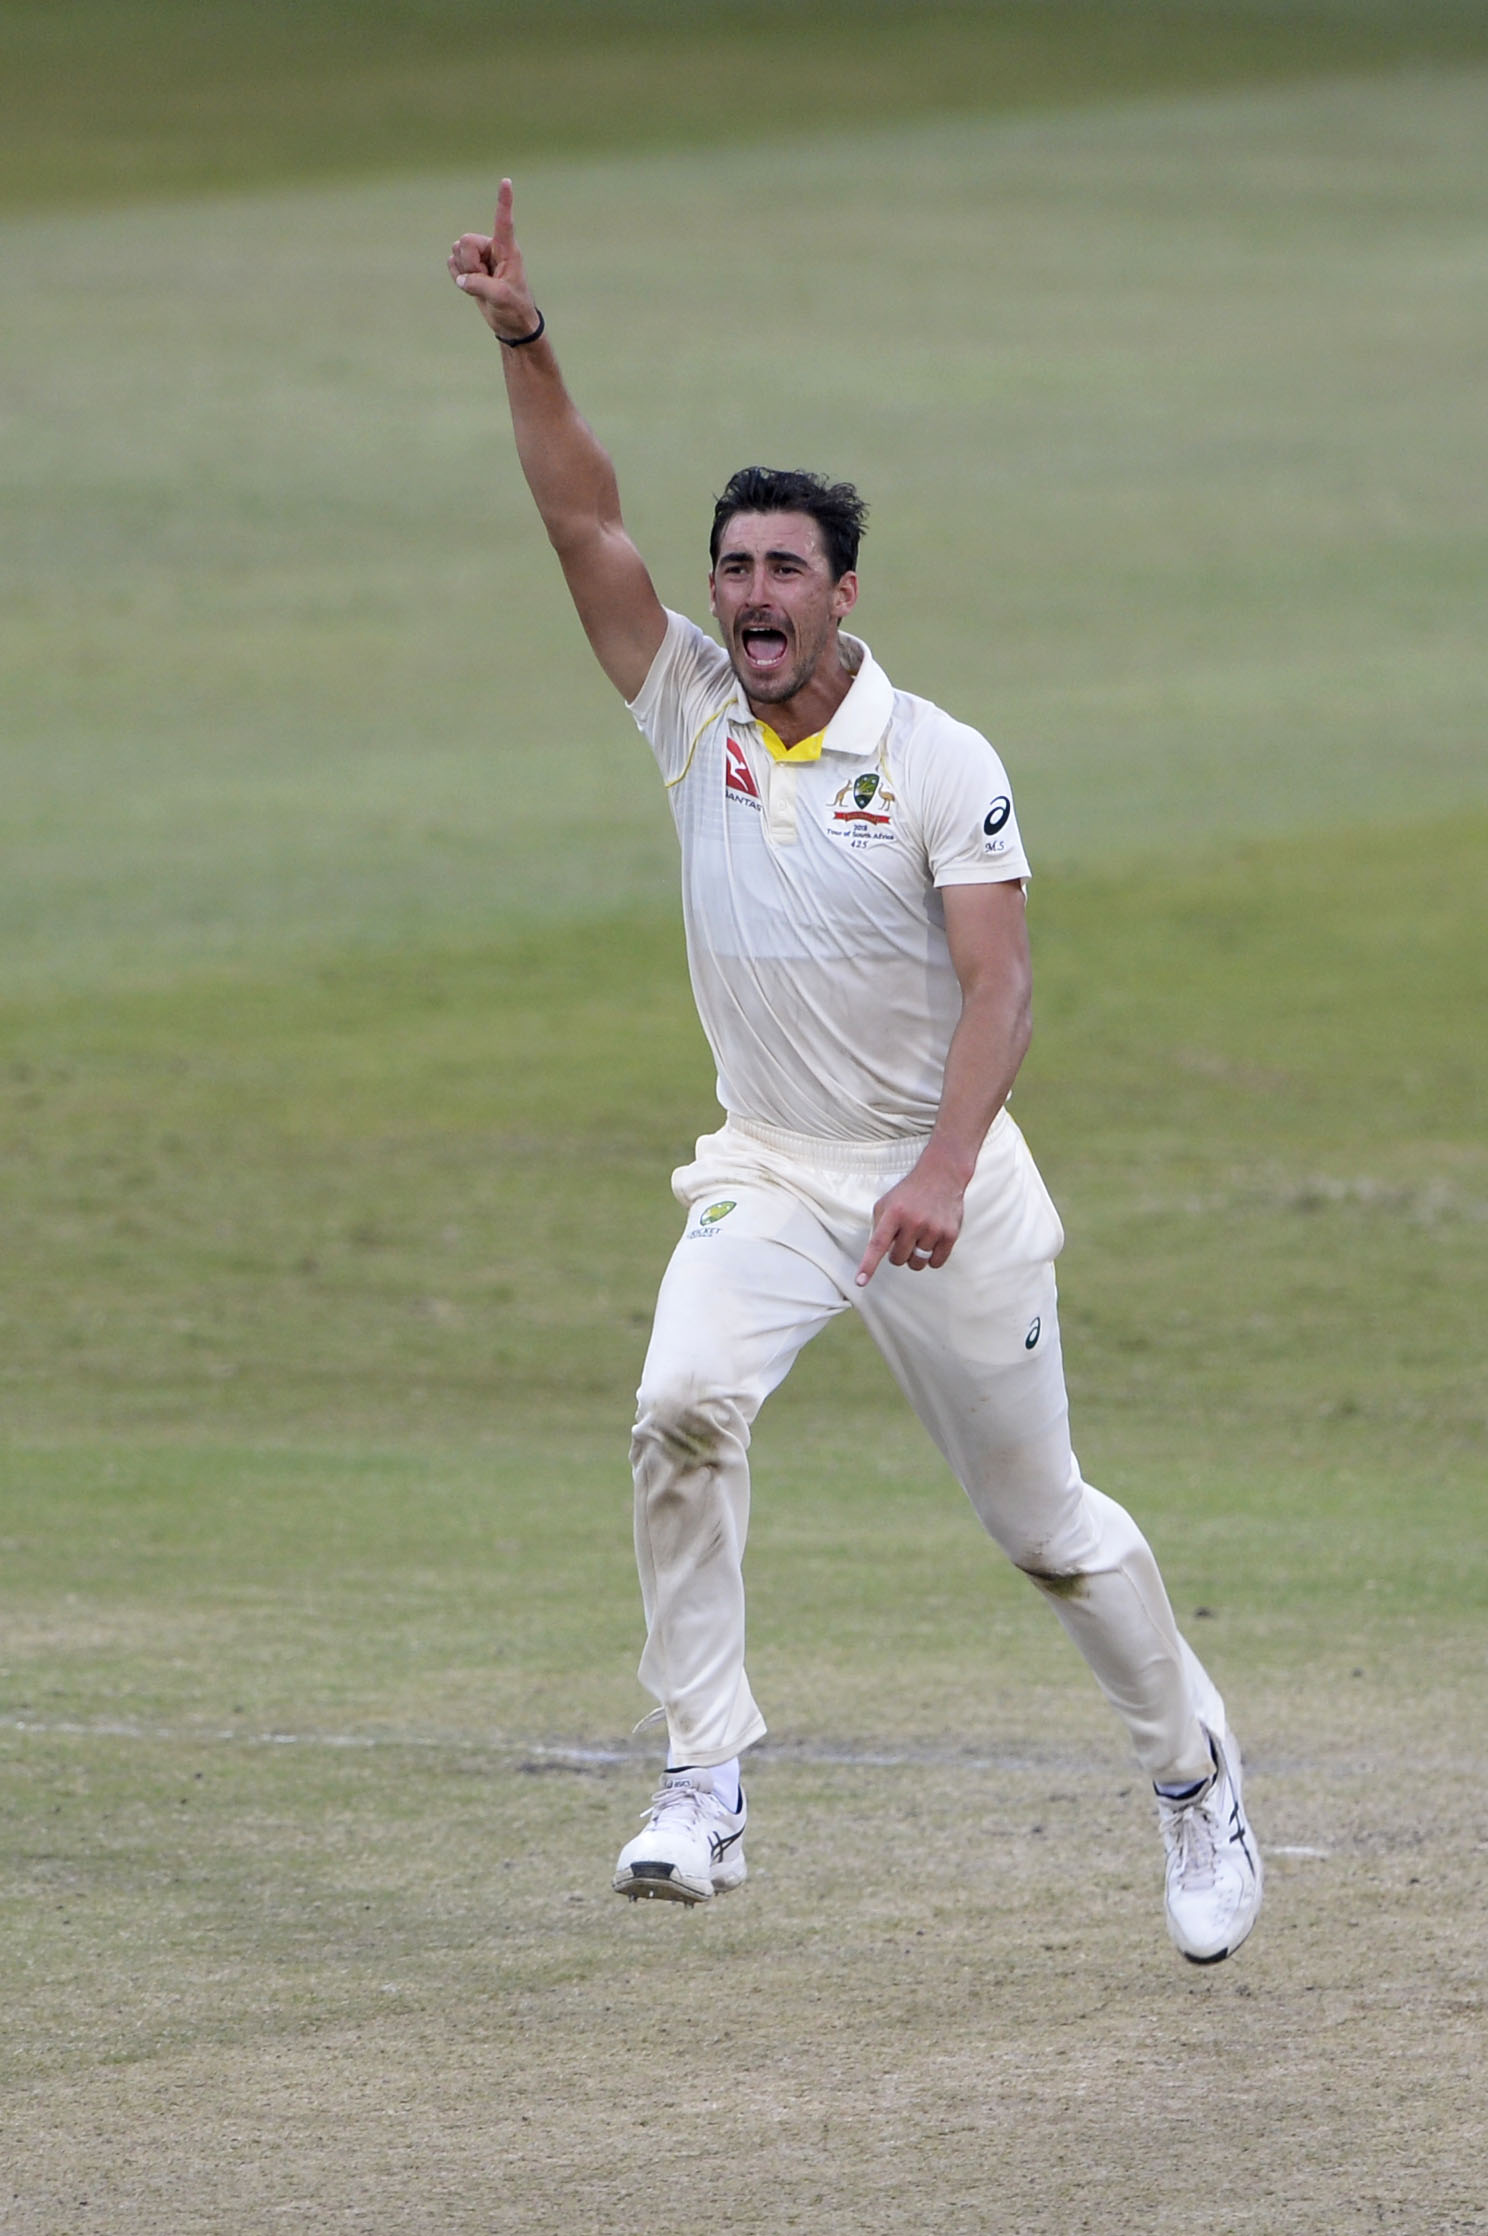 “Starc the impossible” shatters the South Africans